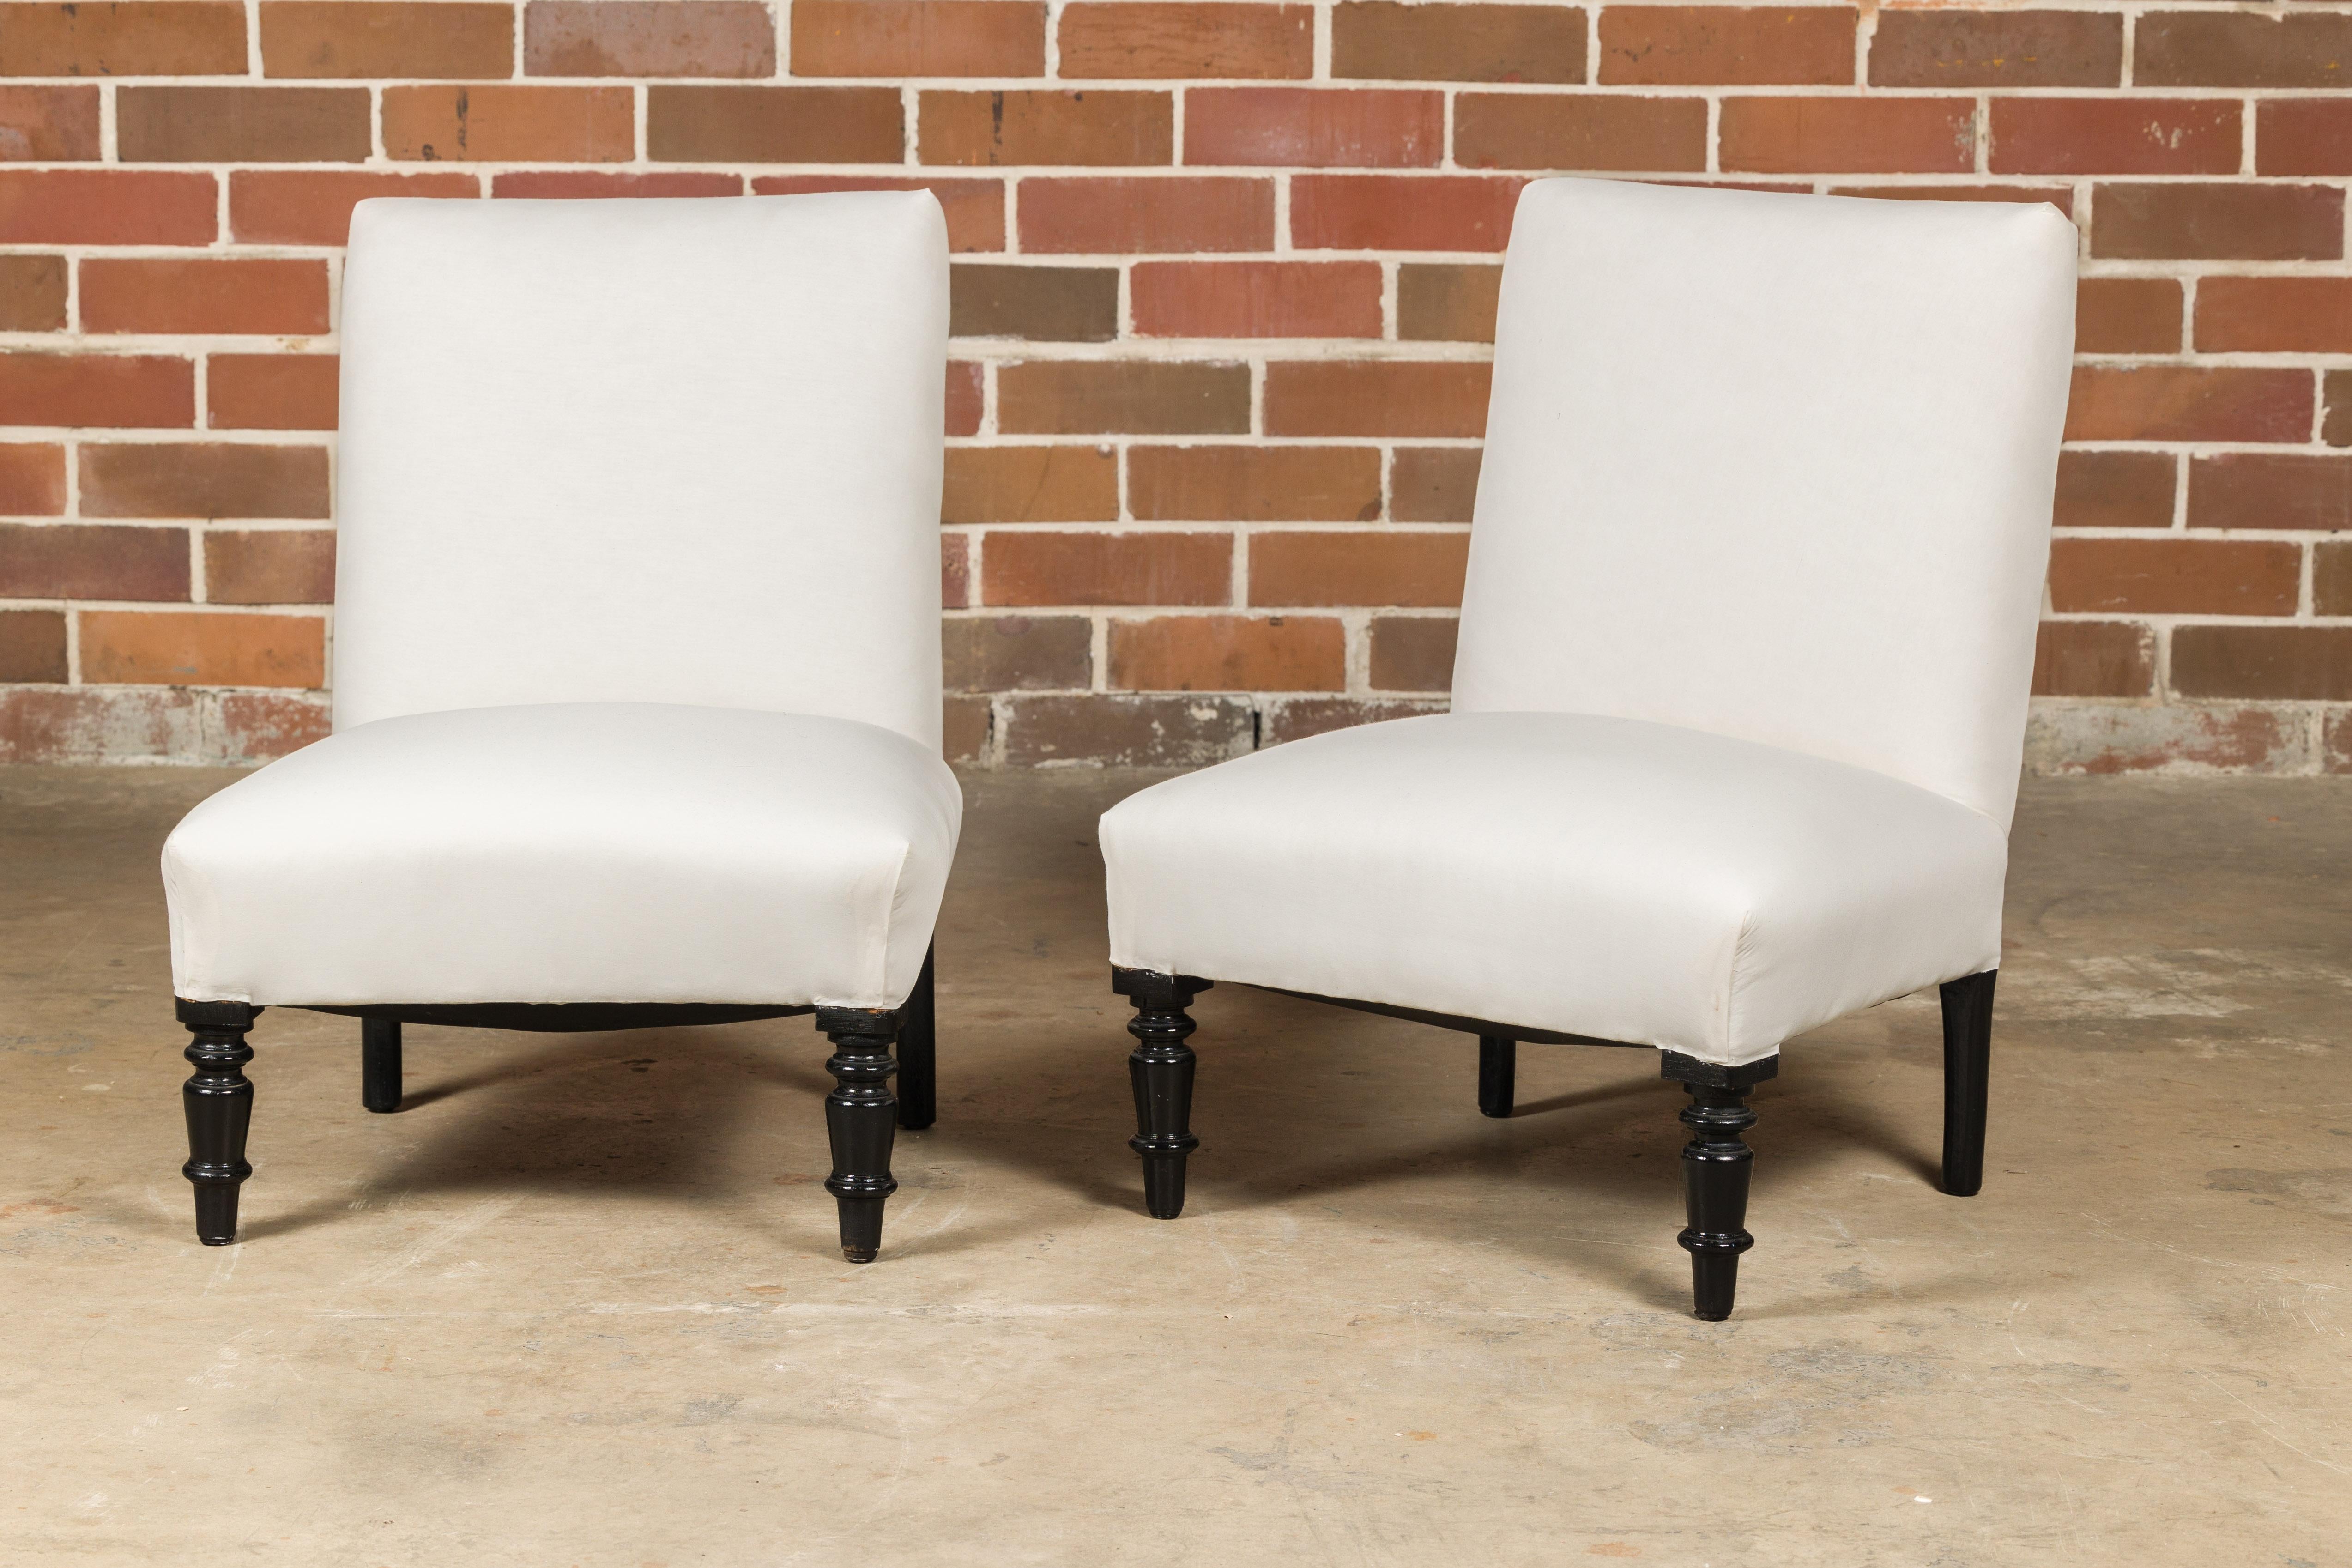 French Turn of the Century Slipper Chairs with Ebonized Turned Legs, a Pair 2